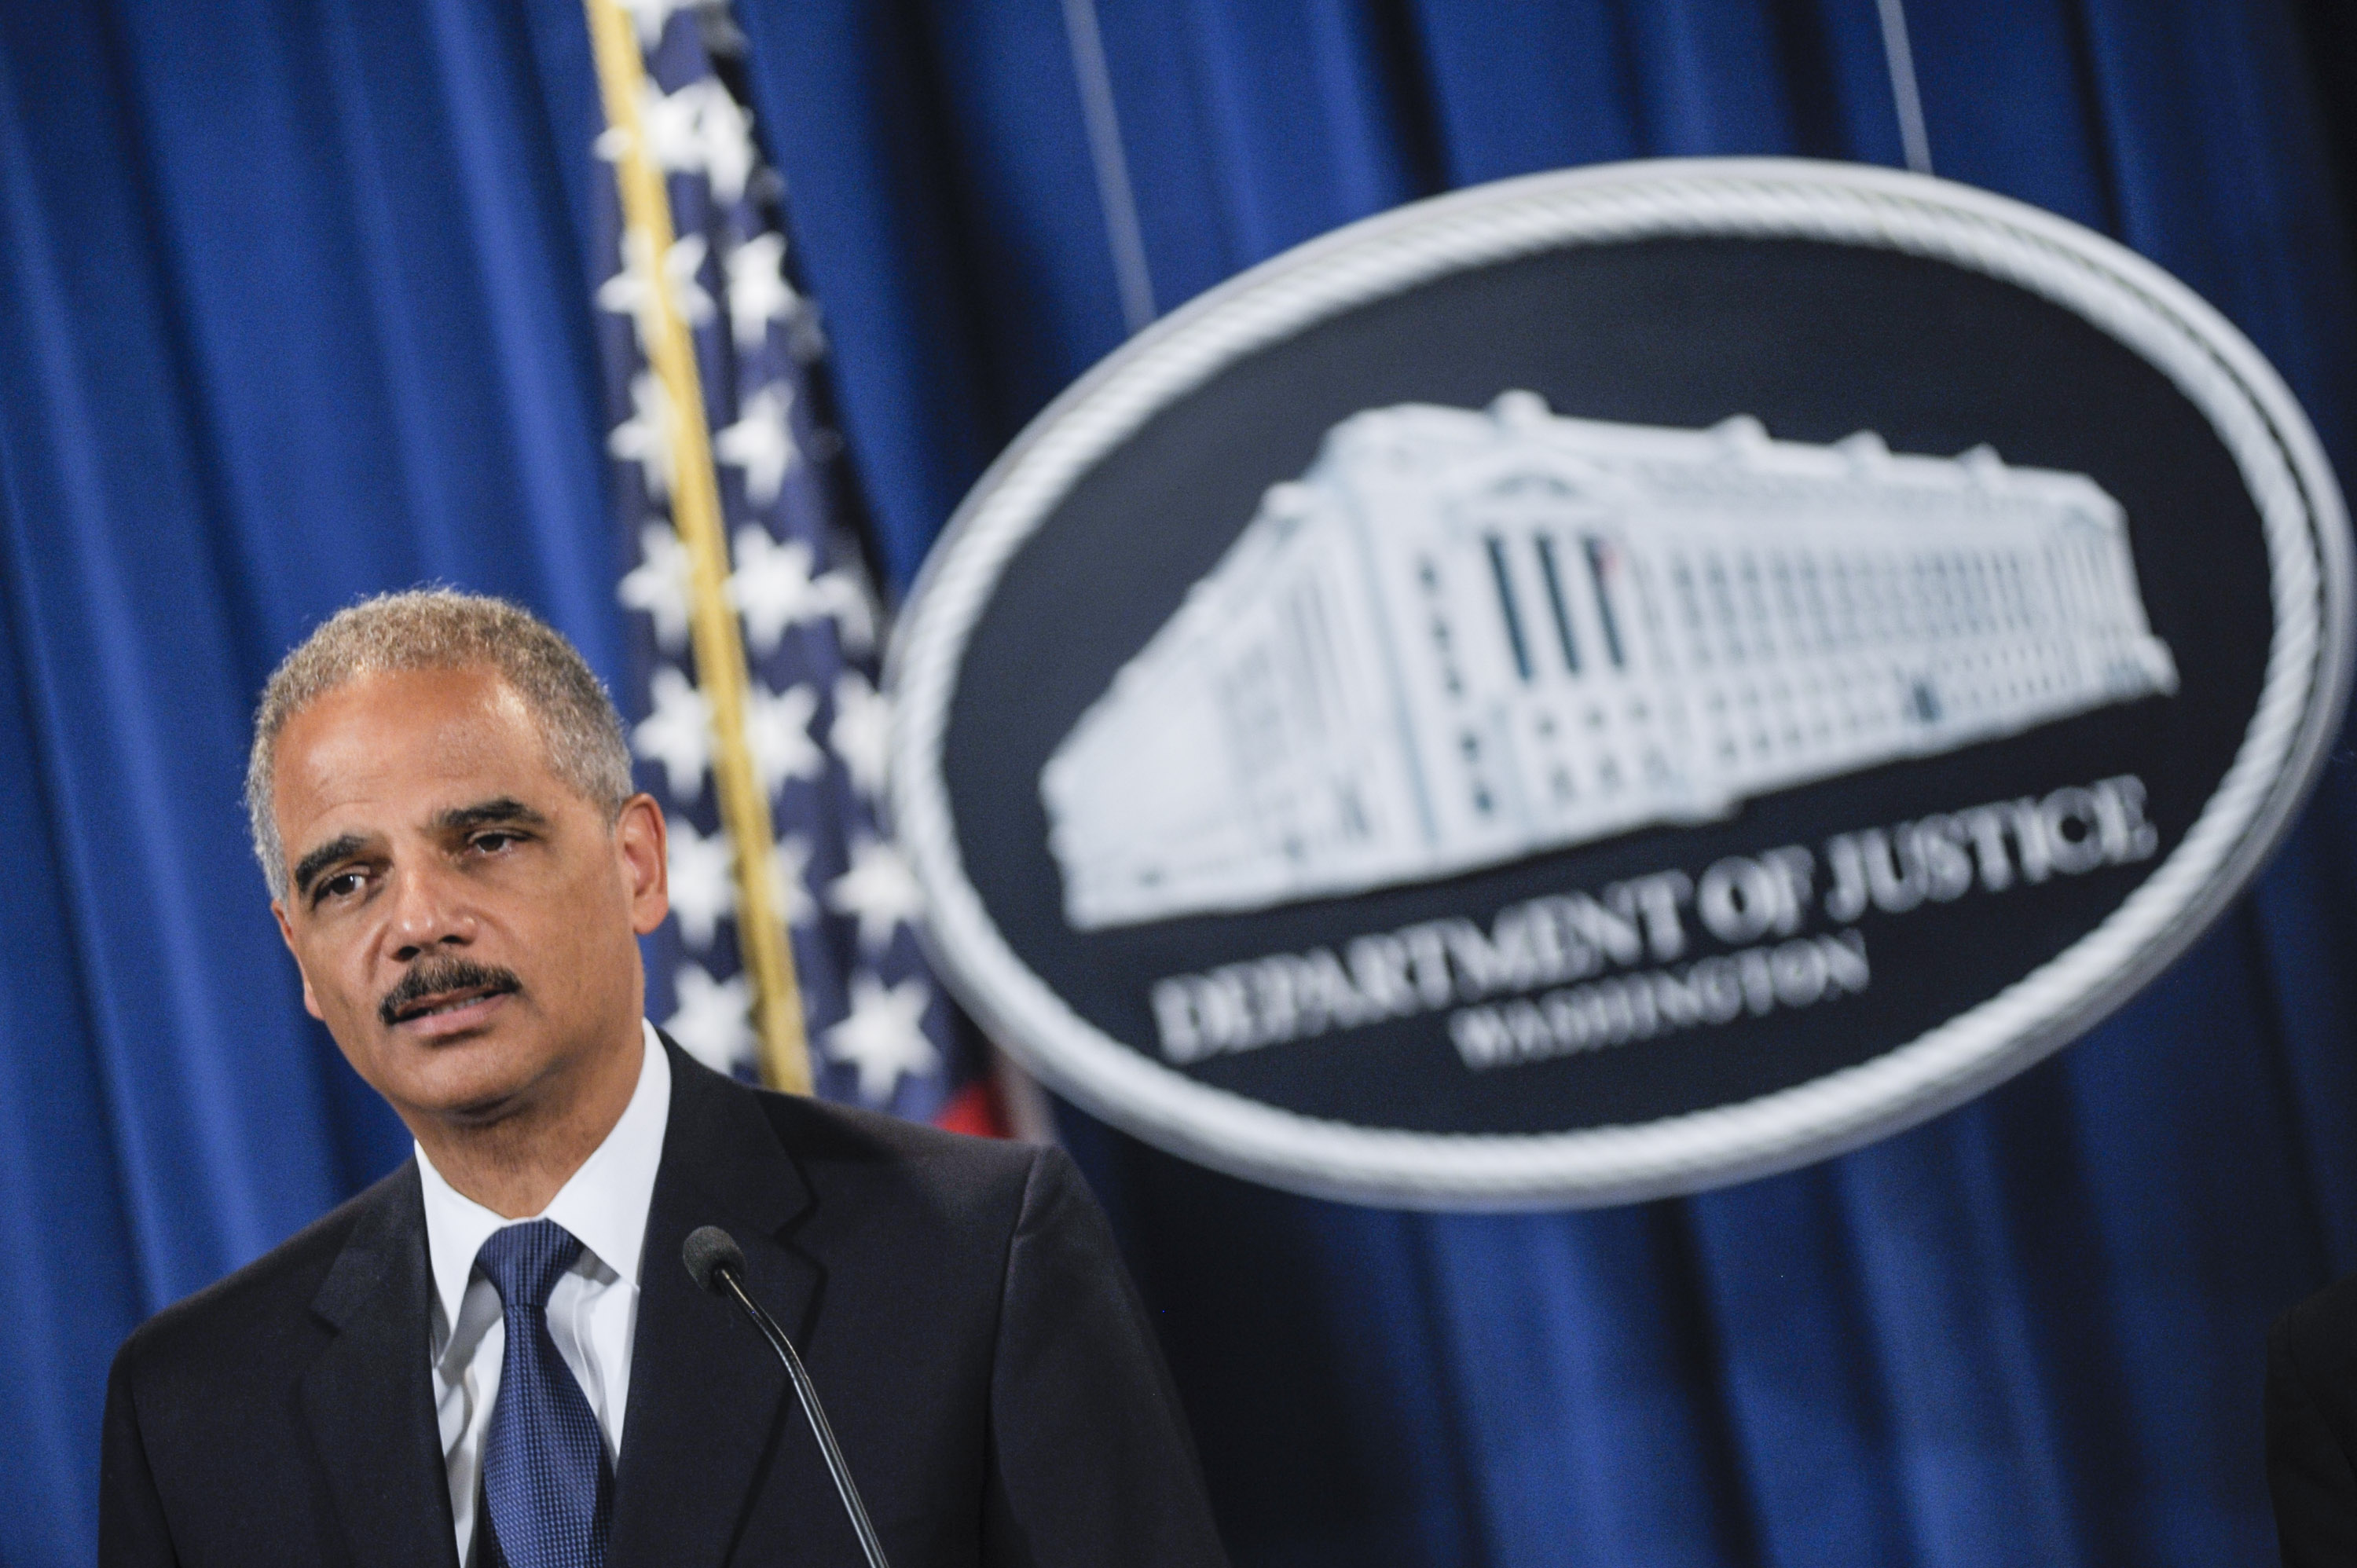 U.S. Attorney General Eric Holder speaks during a press conference announcing Department of Justice plans to sue North Carolina over Voter ID regulations at the Department of Justice on September 30, 2013 in Washington, D.C. (Kris Connor—Getty Images)